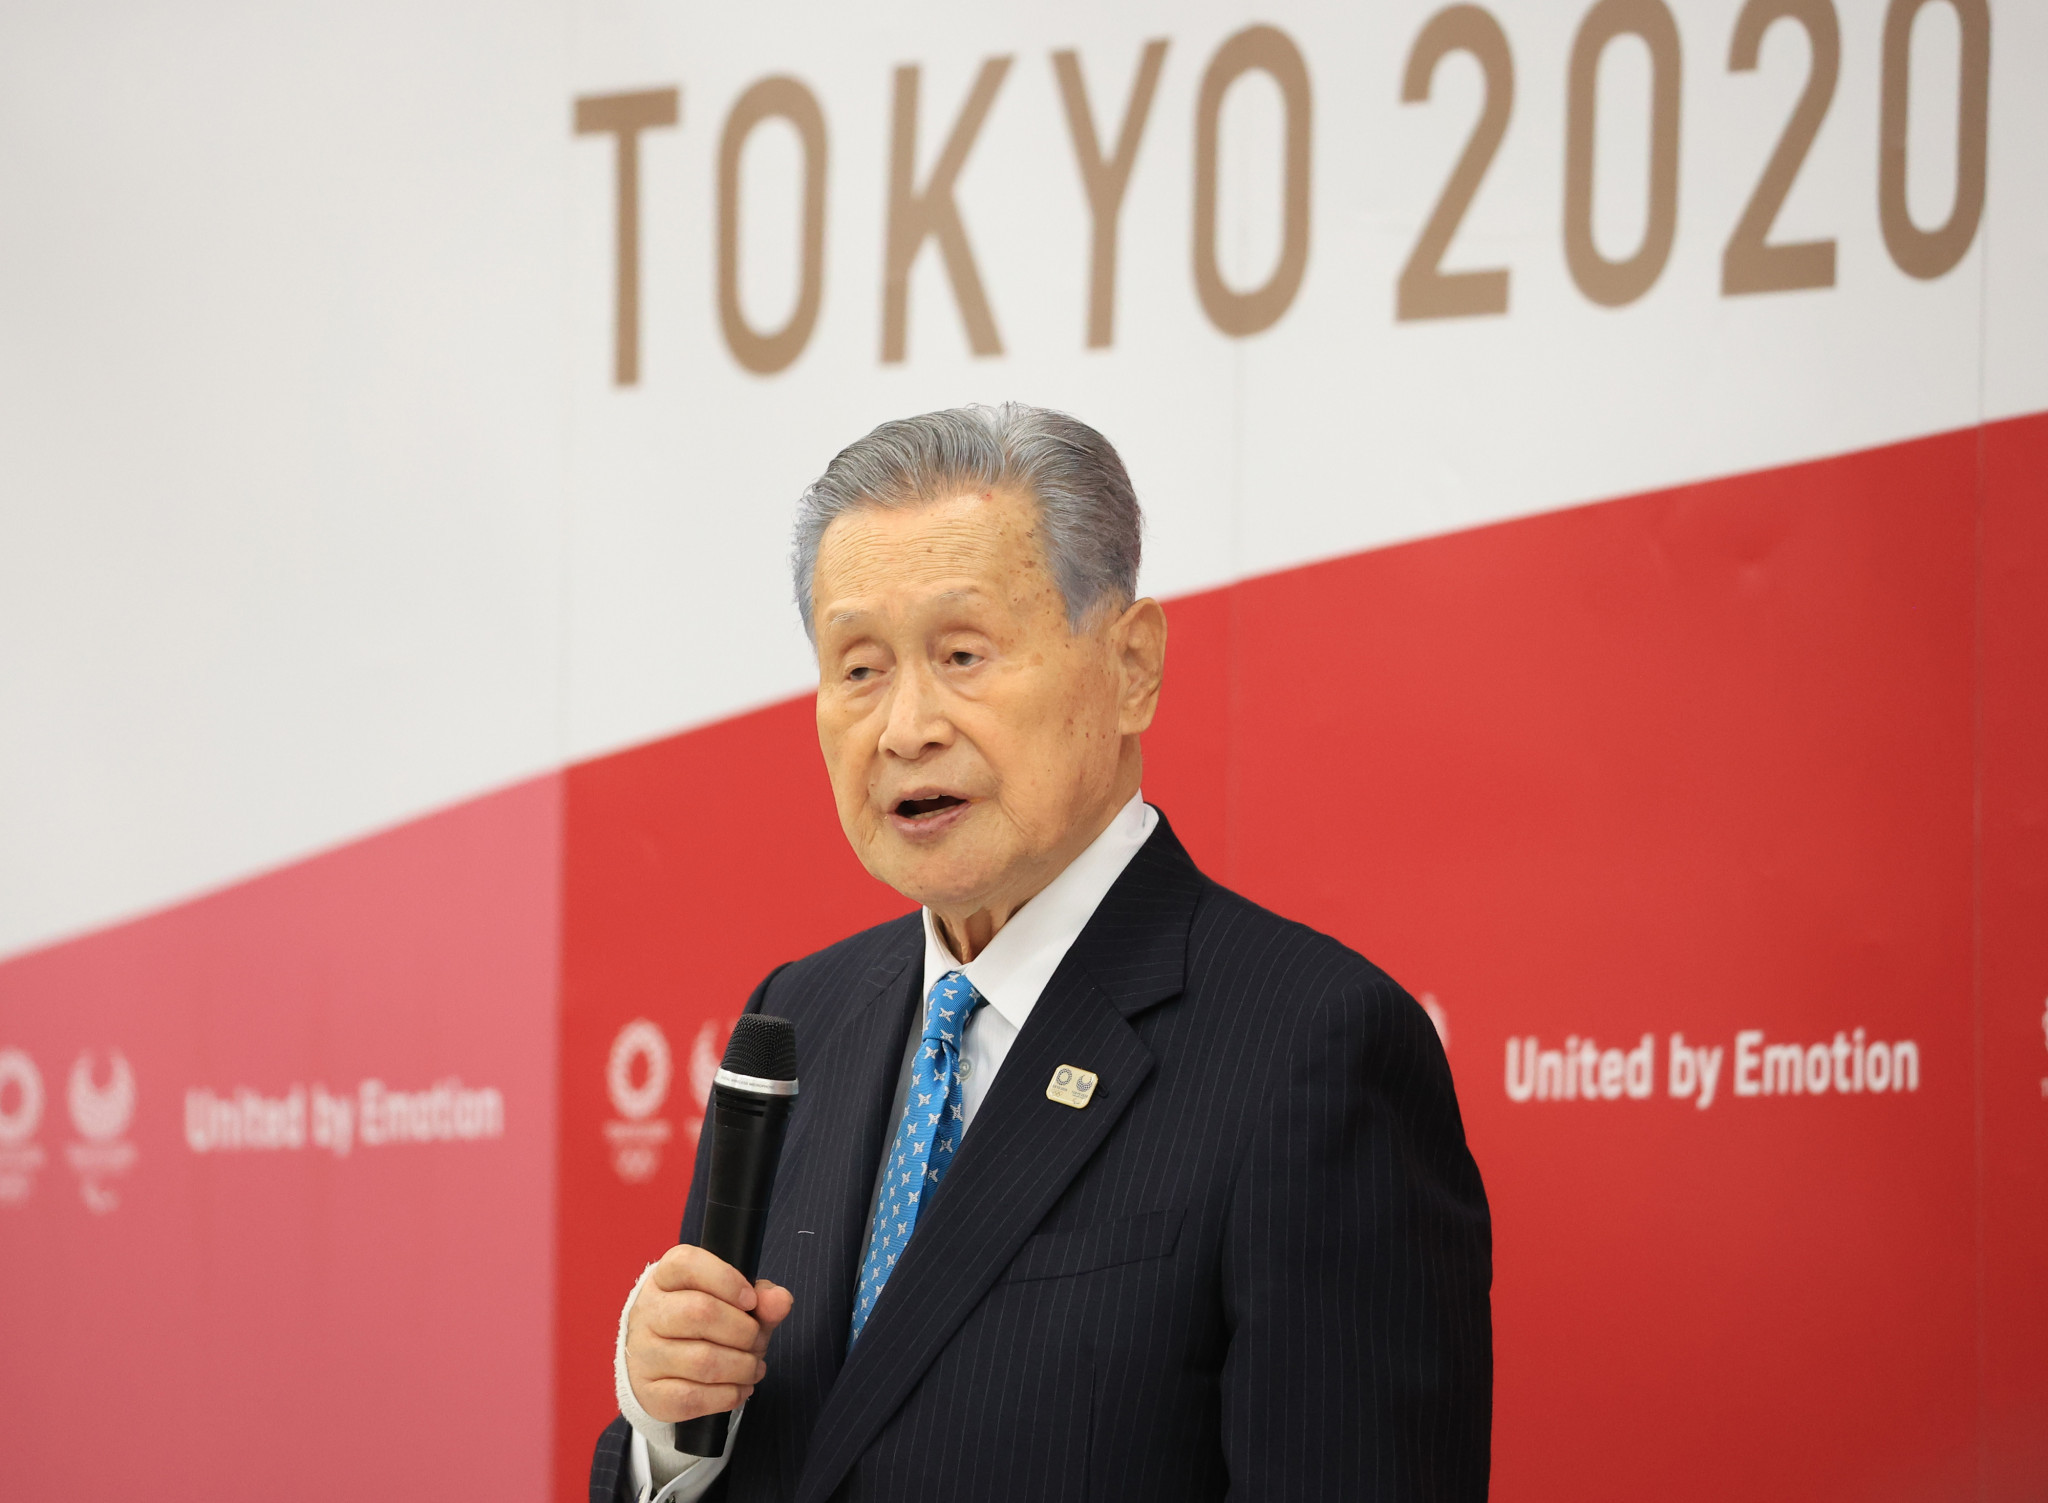 Yoshirō Mori stepped down as Tokyo 2020 President last week following a sexism row ©Getty Images